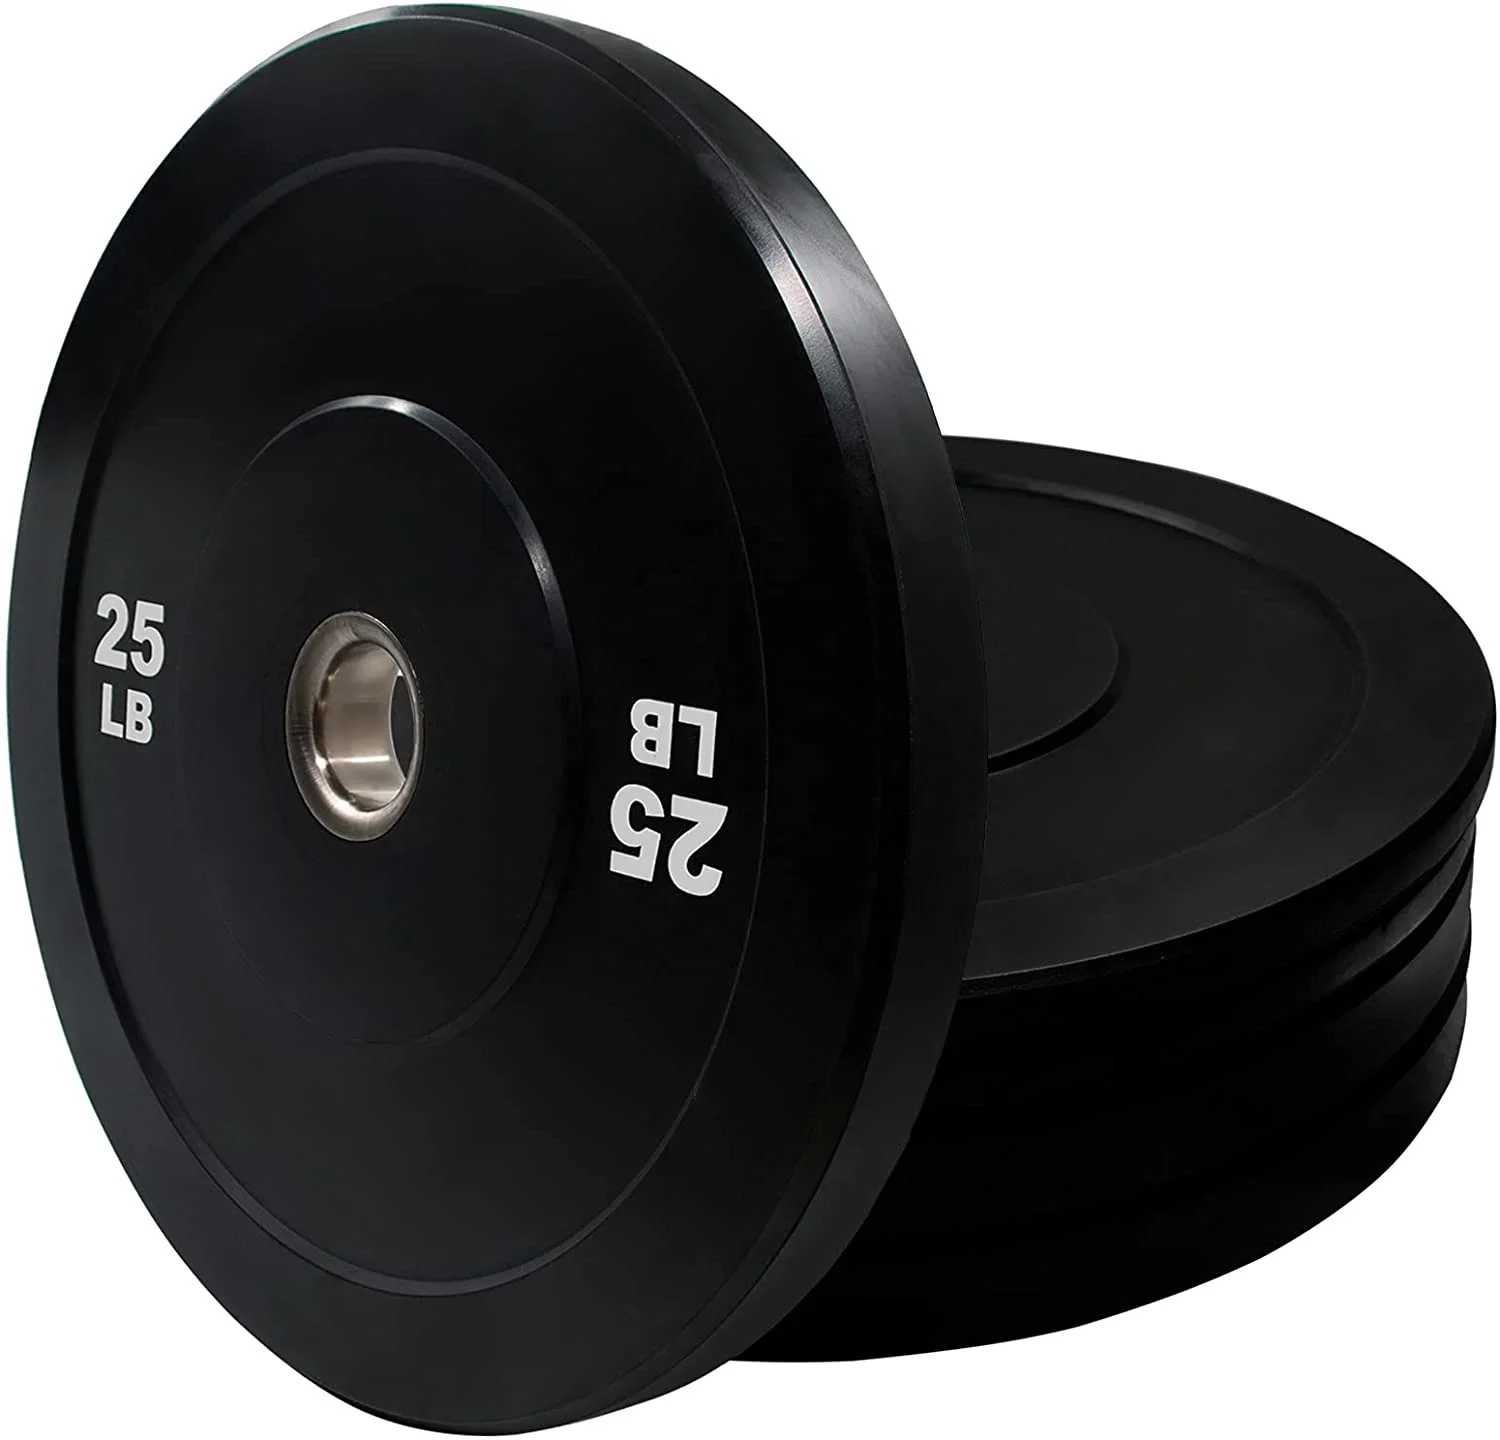 

Custom Free Weight Plate Rubber Covered Black Bumper Plates For Barbell Weight Lifting Plate Set Lbs